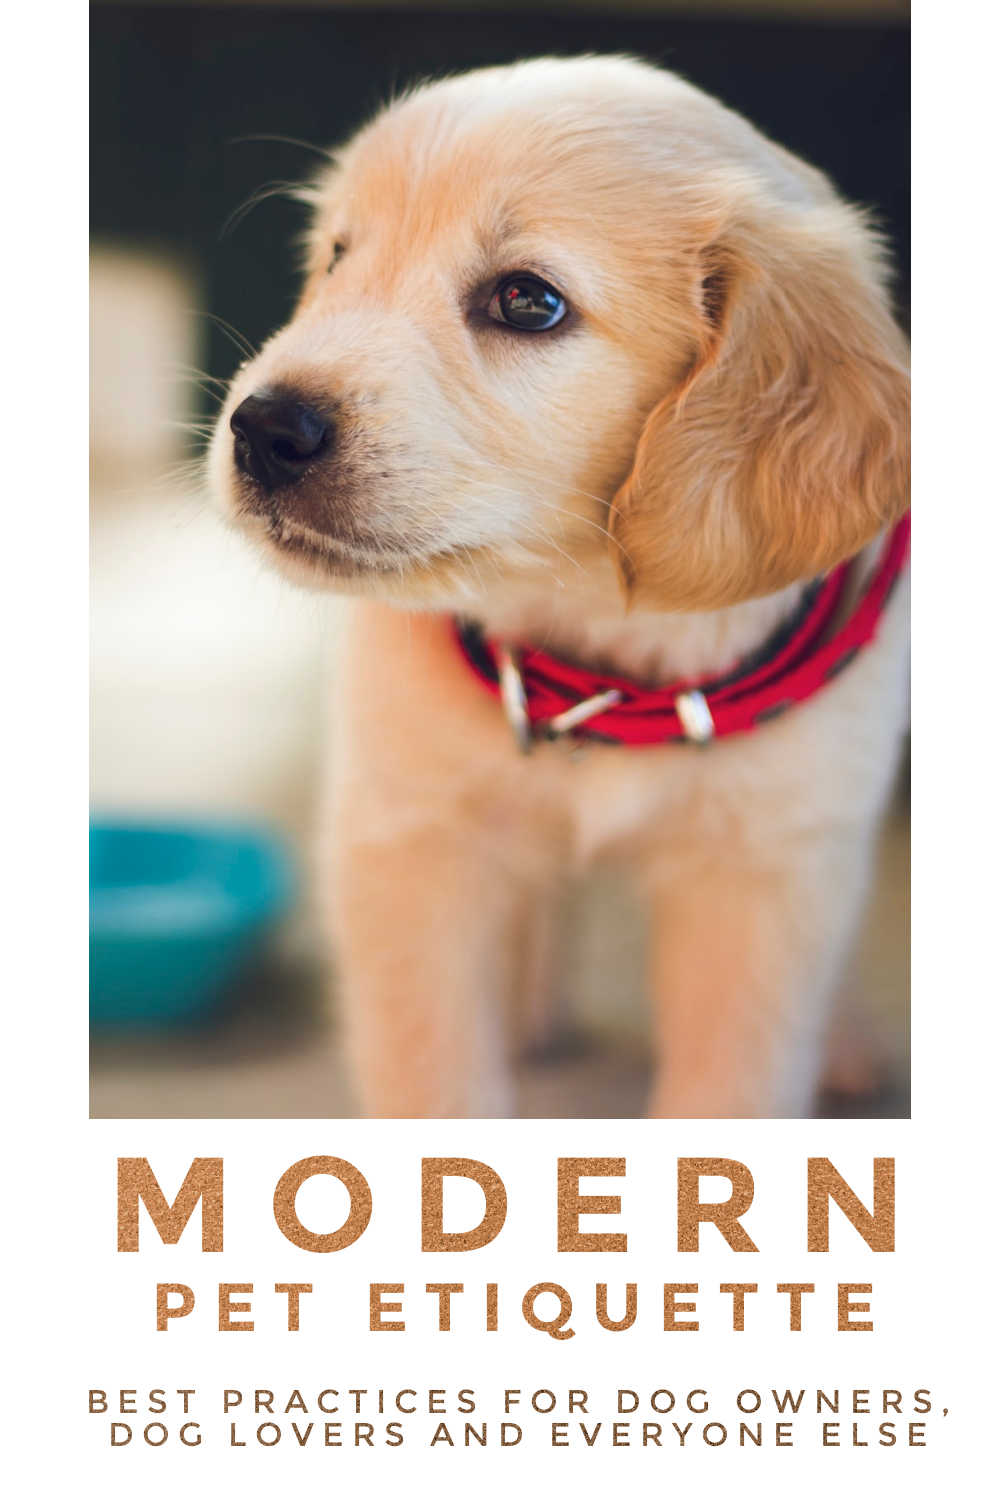 Yellow laborador puppy with red collar and text at the bottom of the image saying Modern Pet Etiquette